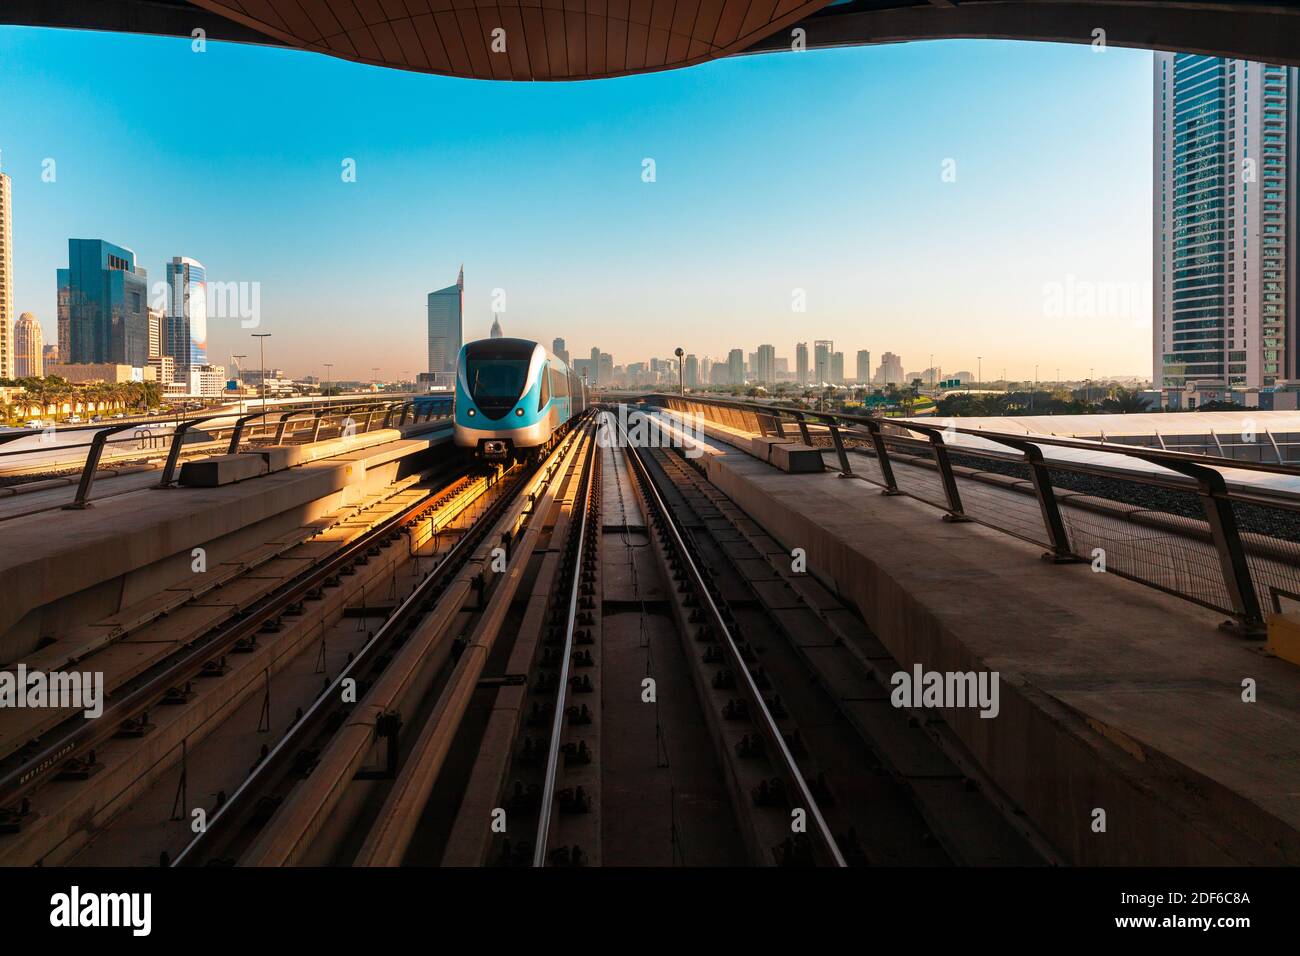 View of the train and the Dubai downtown skyline from a metro station, Dubai, UAE Stock Photo